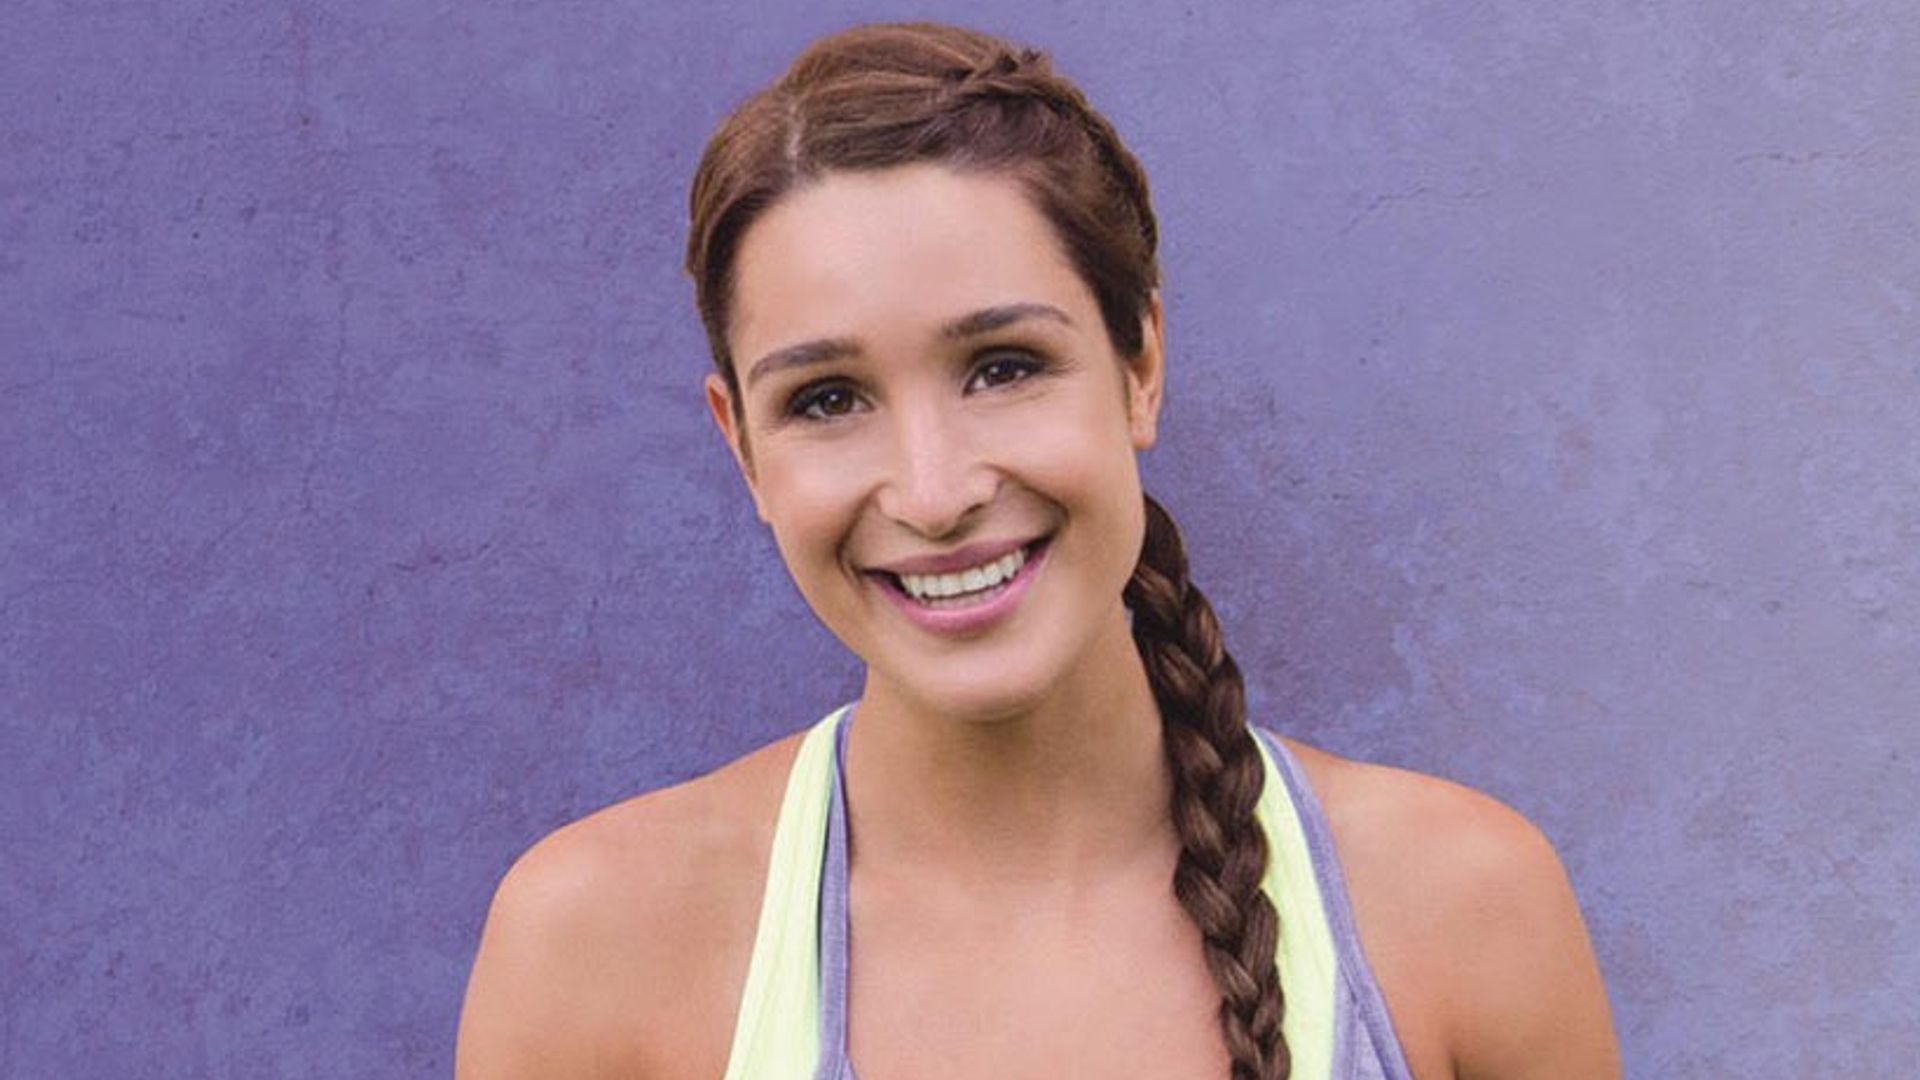 Try a one-day healthy meal plan from Kayla Itsines' new book